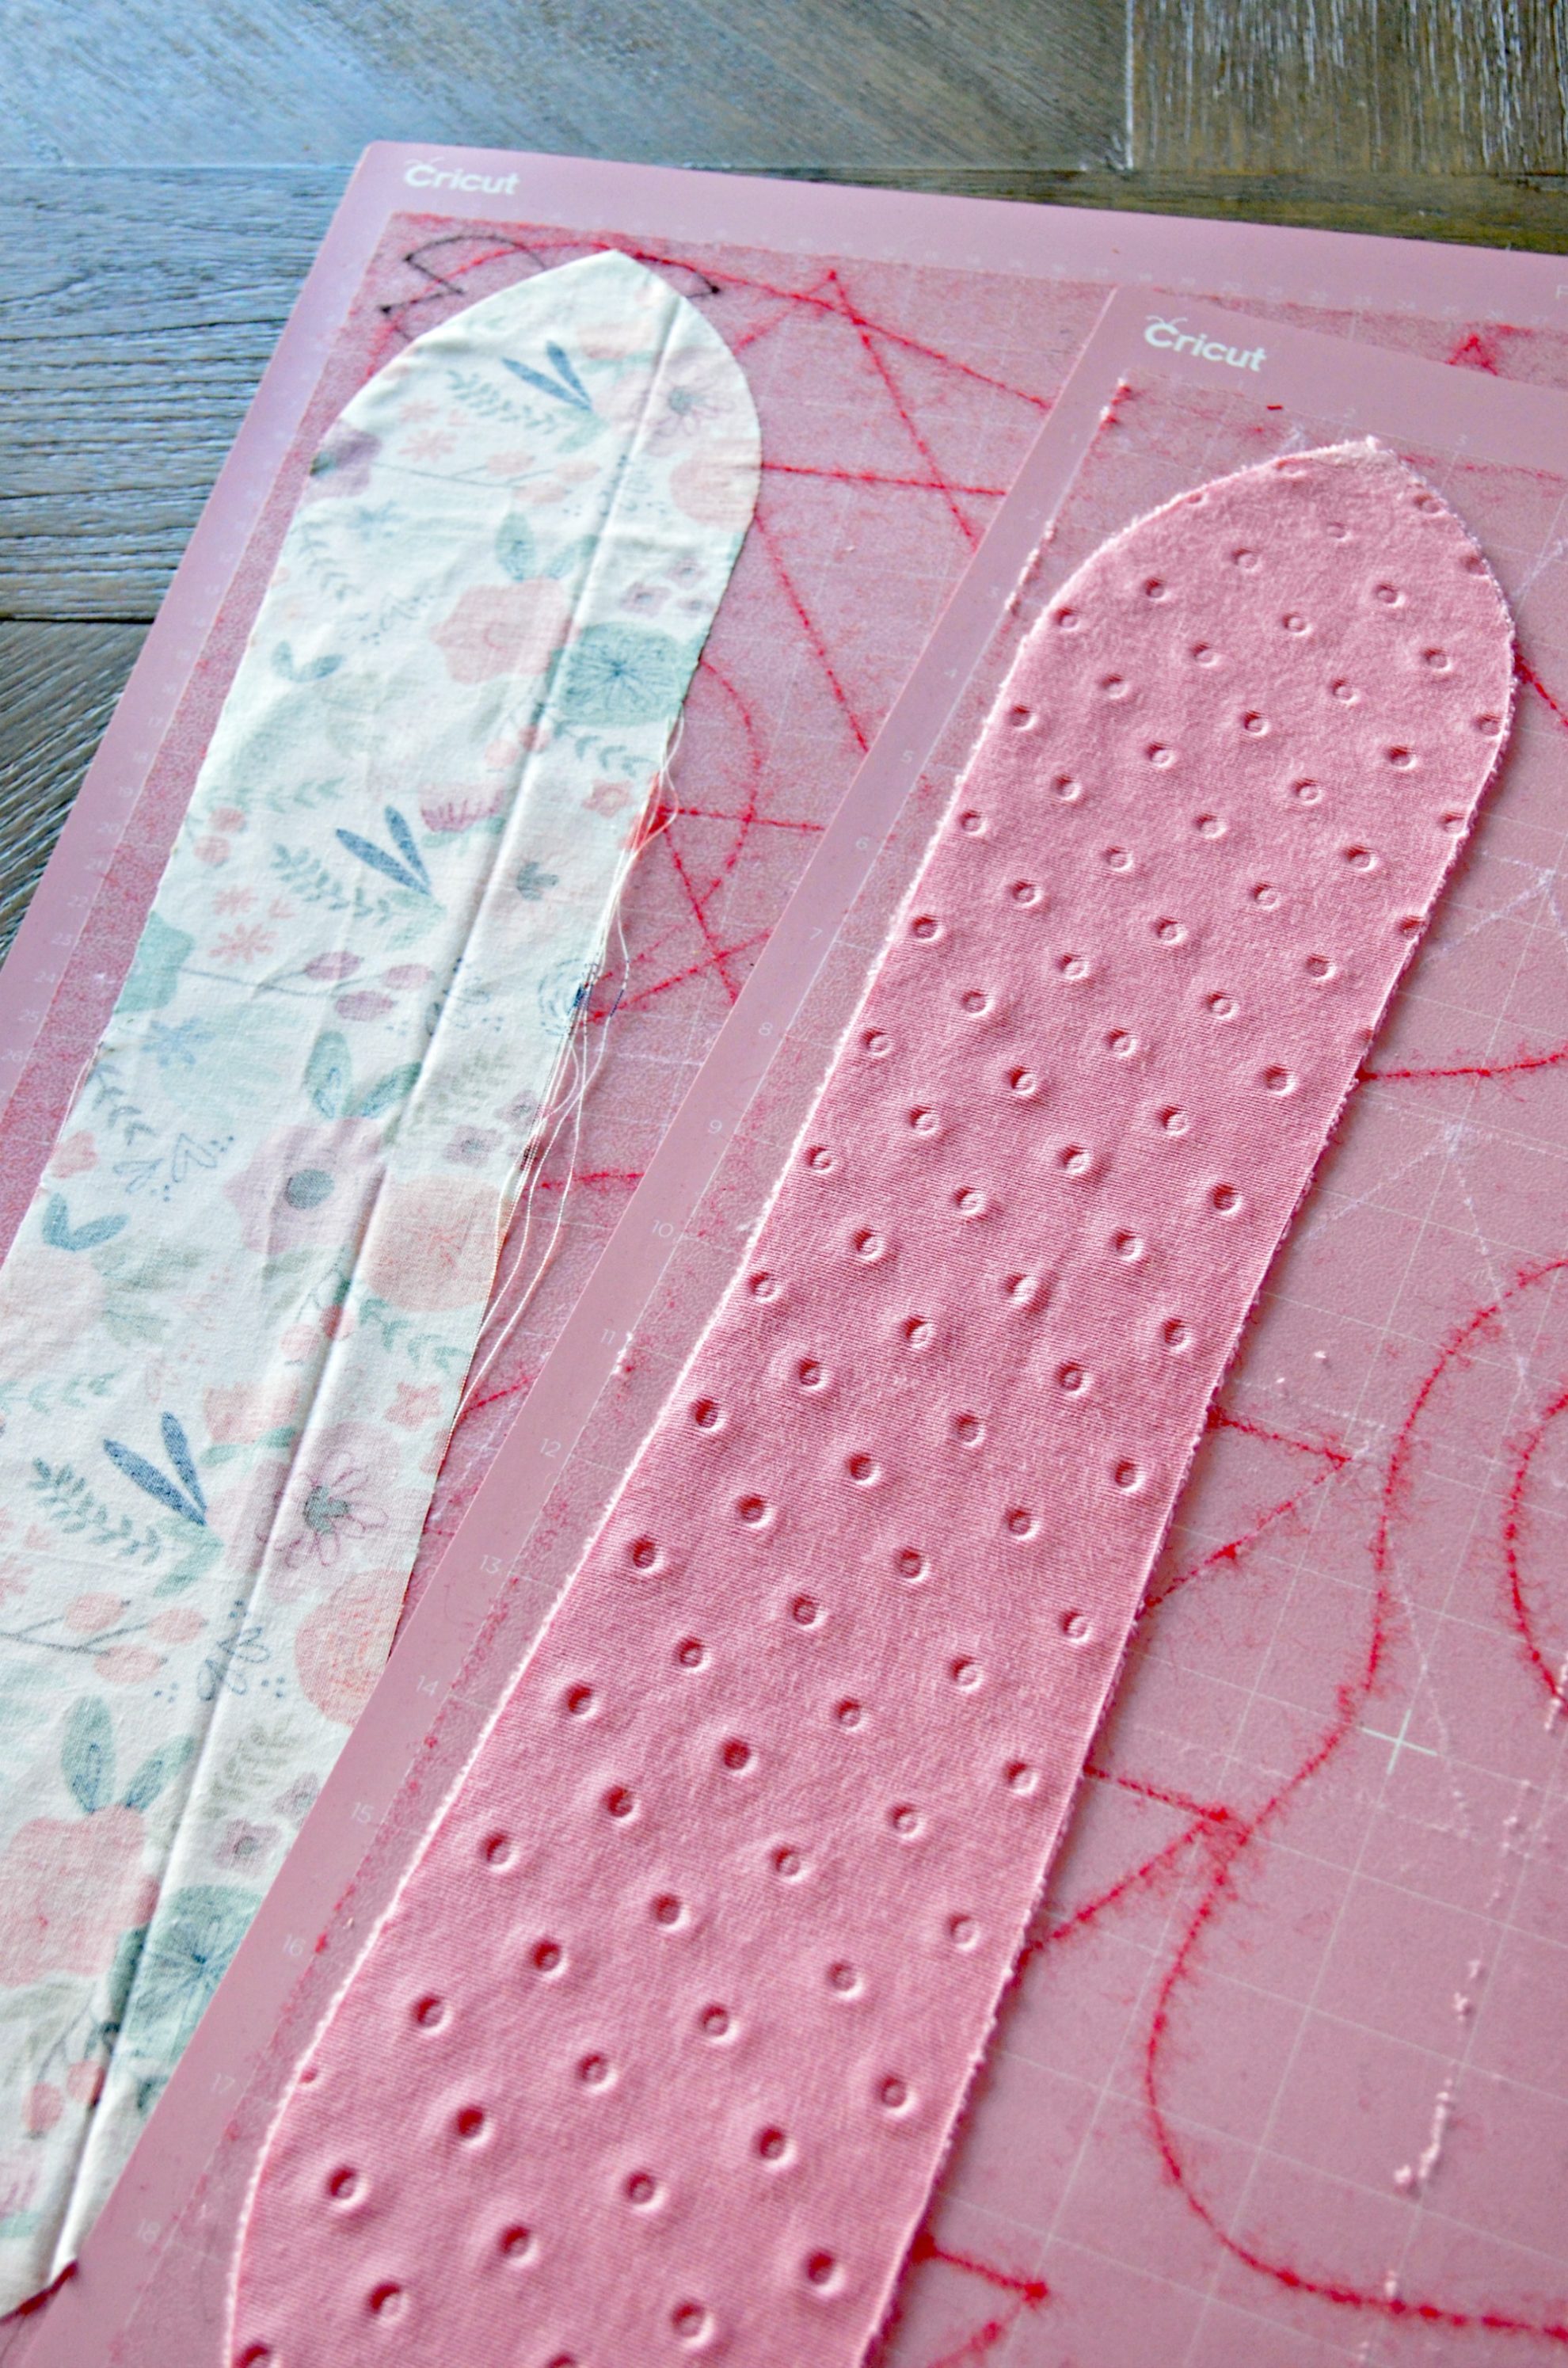 Two pink Cricut cutting mats with two pieces of cut fabric on them.